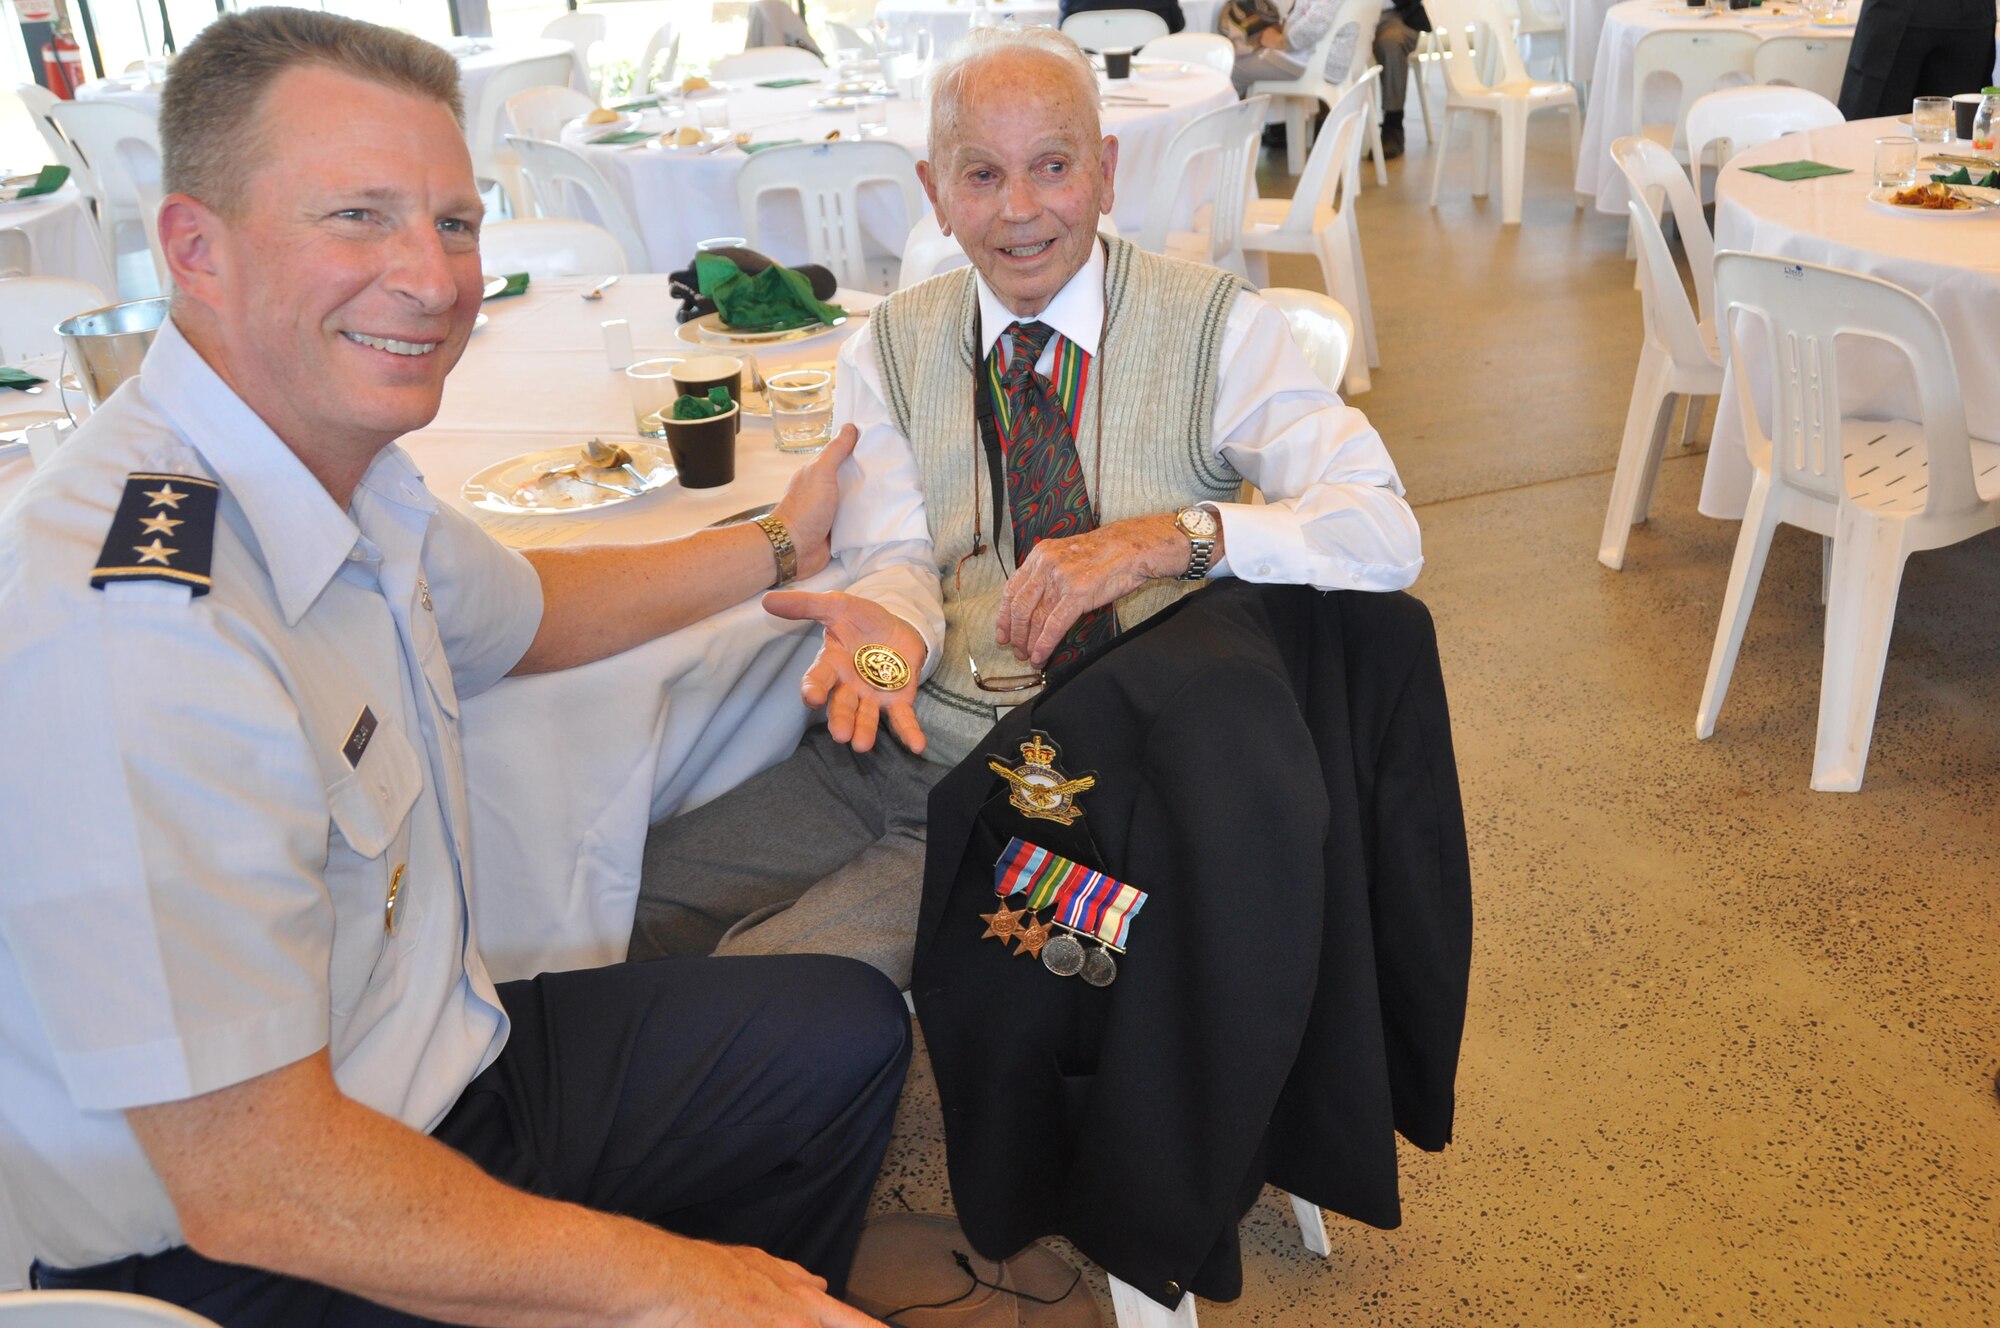 Cyril McLean, a Royal Australian Air Force World War II veteran, shows off a 5th Air Force coin presented by Lt. Gen. John Dolan, Commander, 5th Air Force, during a veterans’ luncheon hosted by Townsville, Australia, Aug. 15, 2015. The luncheon was part of several events to honor the veterans of WWII as the city commemorated the 70th anniversary of the end of the war. (U.S. Air Force photo by Capt. George M. Tobias/Released)